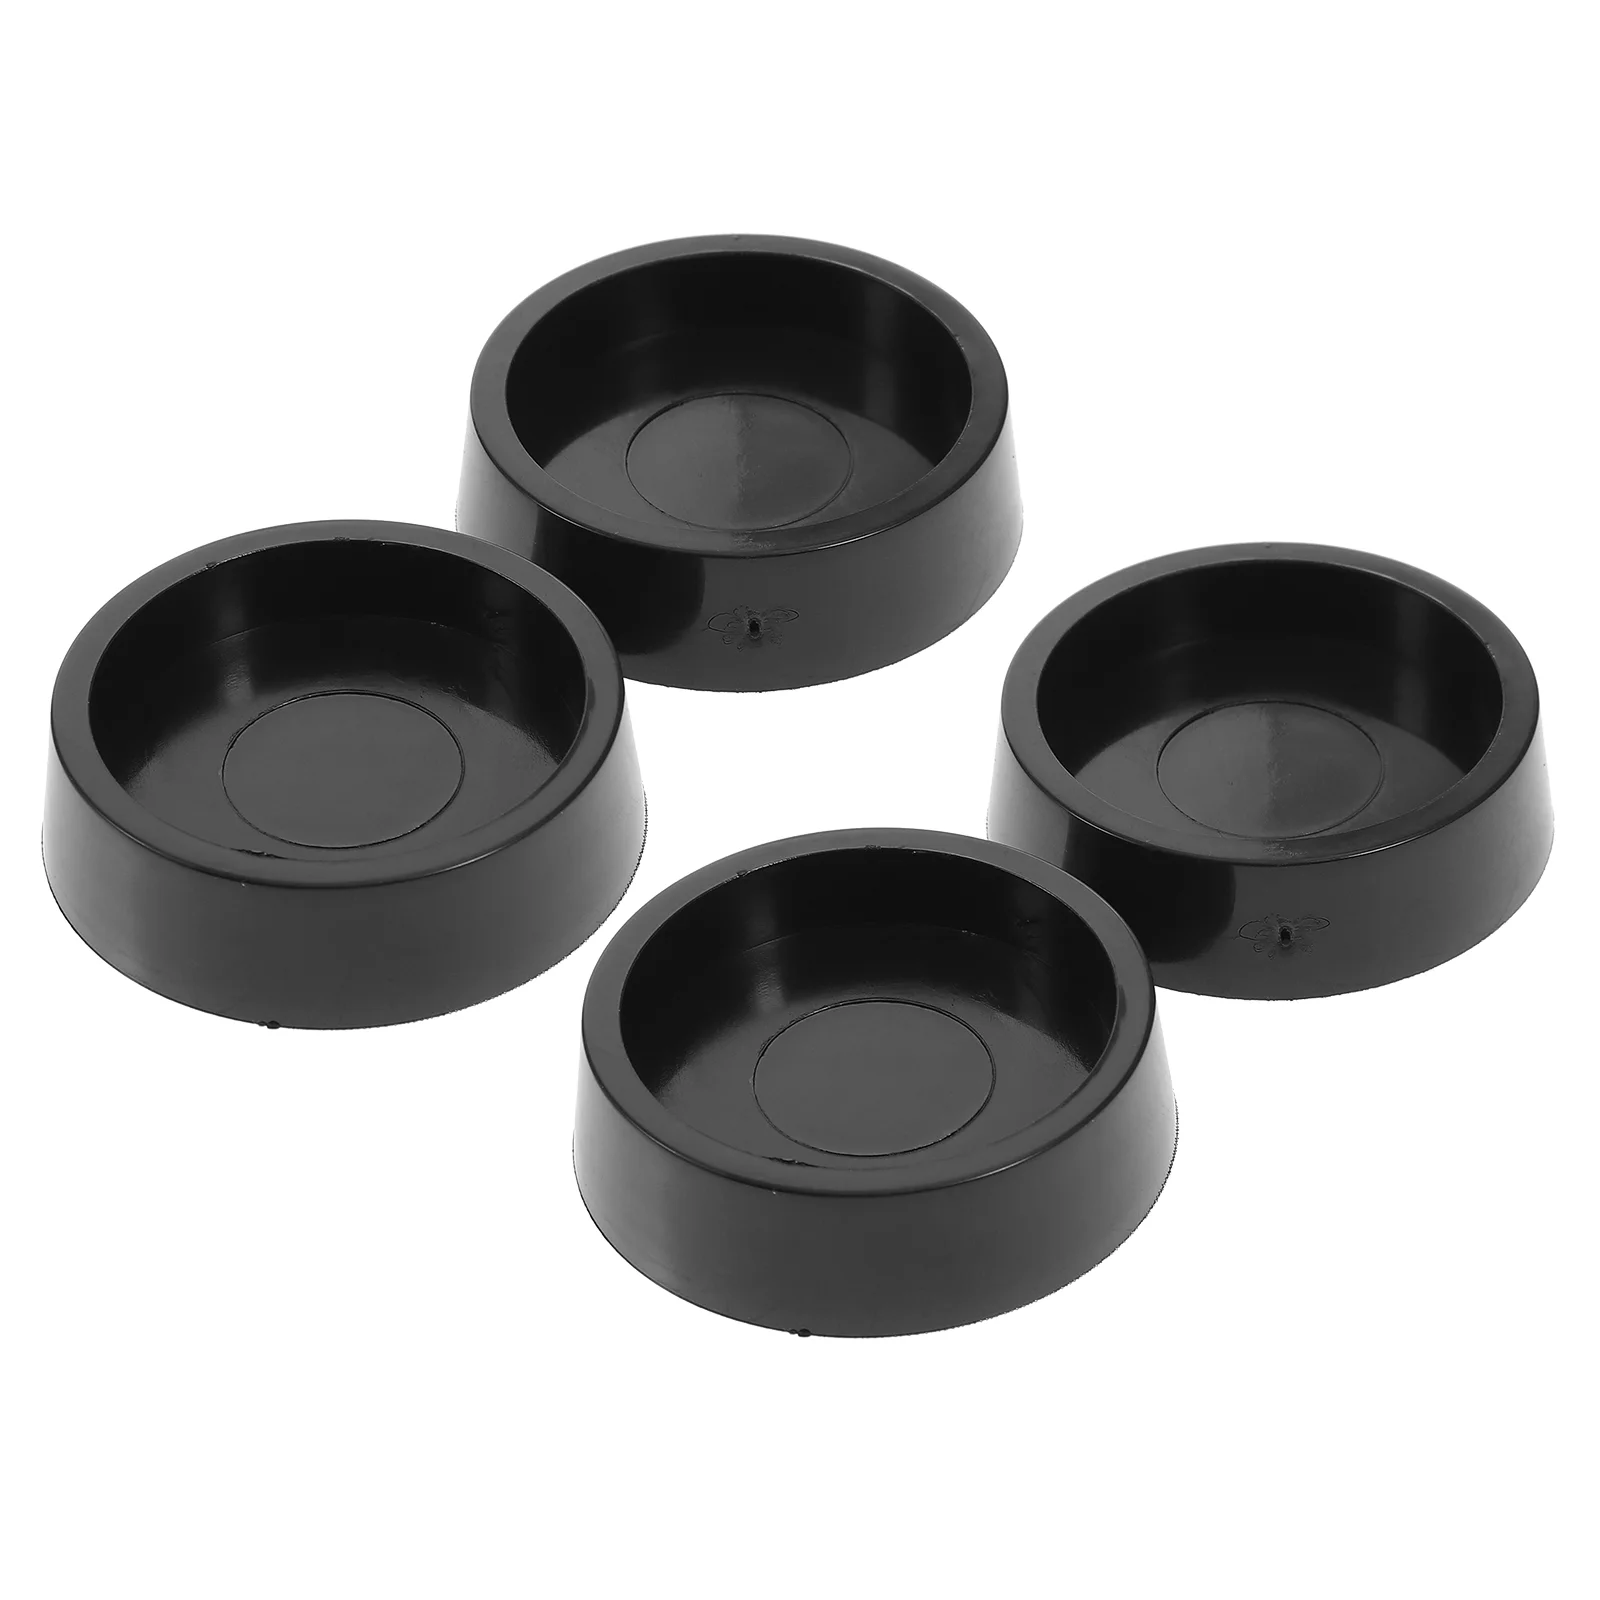 

4 Pcs Circle Rugs Anti- Foot Mat Coasters Carpet Furniture Round Rubber Cups Furniture Legs Bed Stopper Chair Wheel Stopper